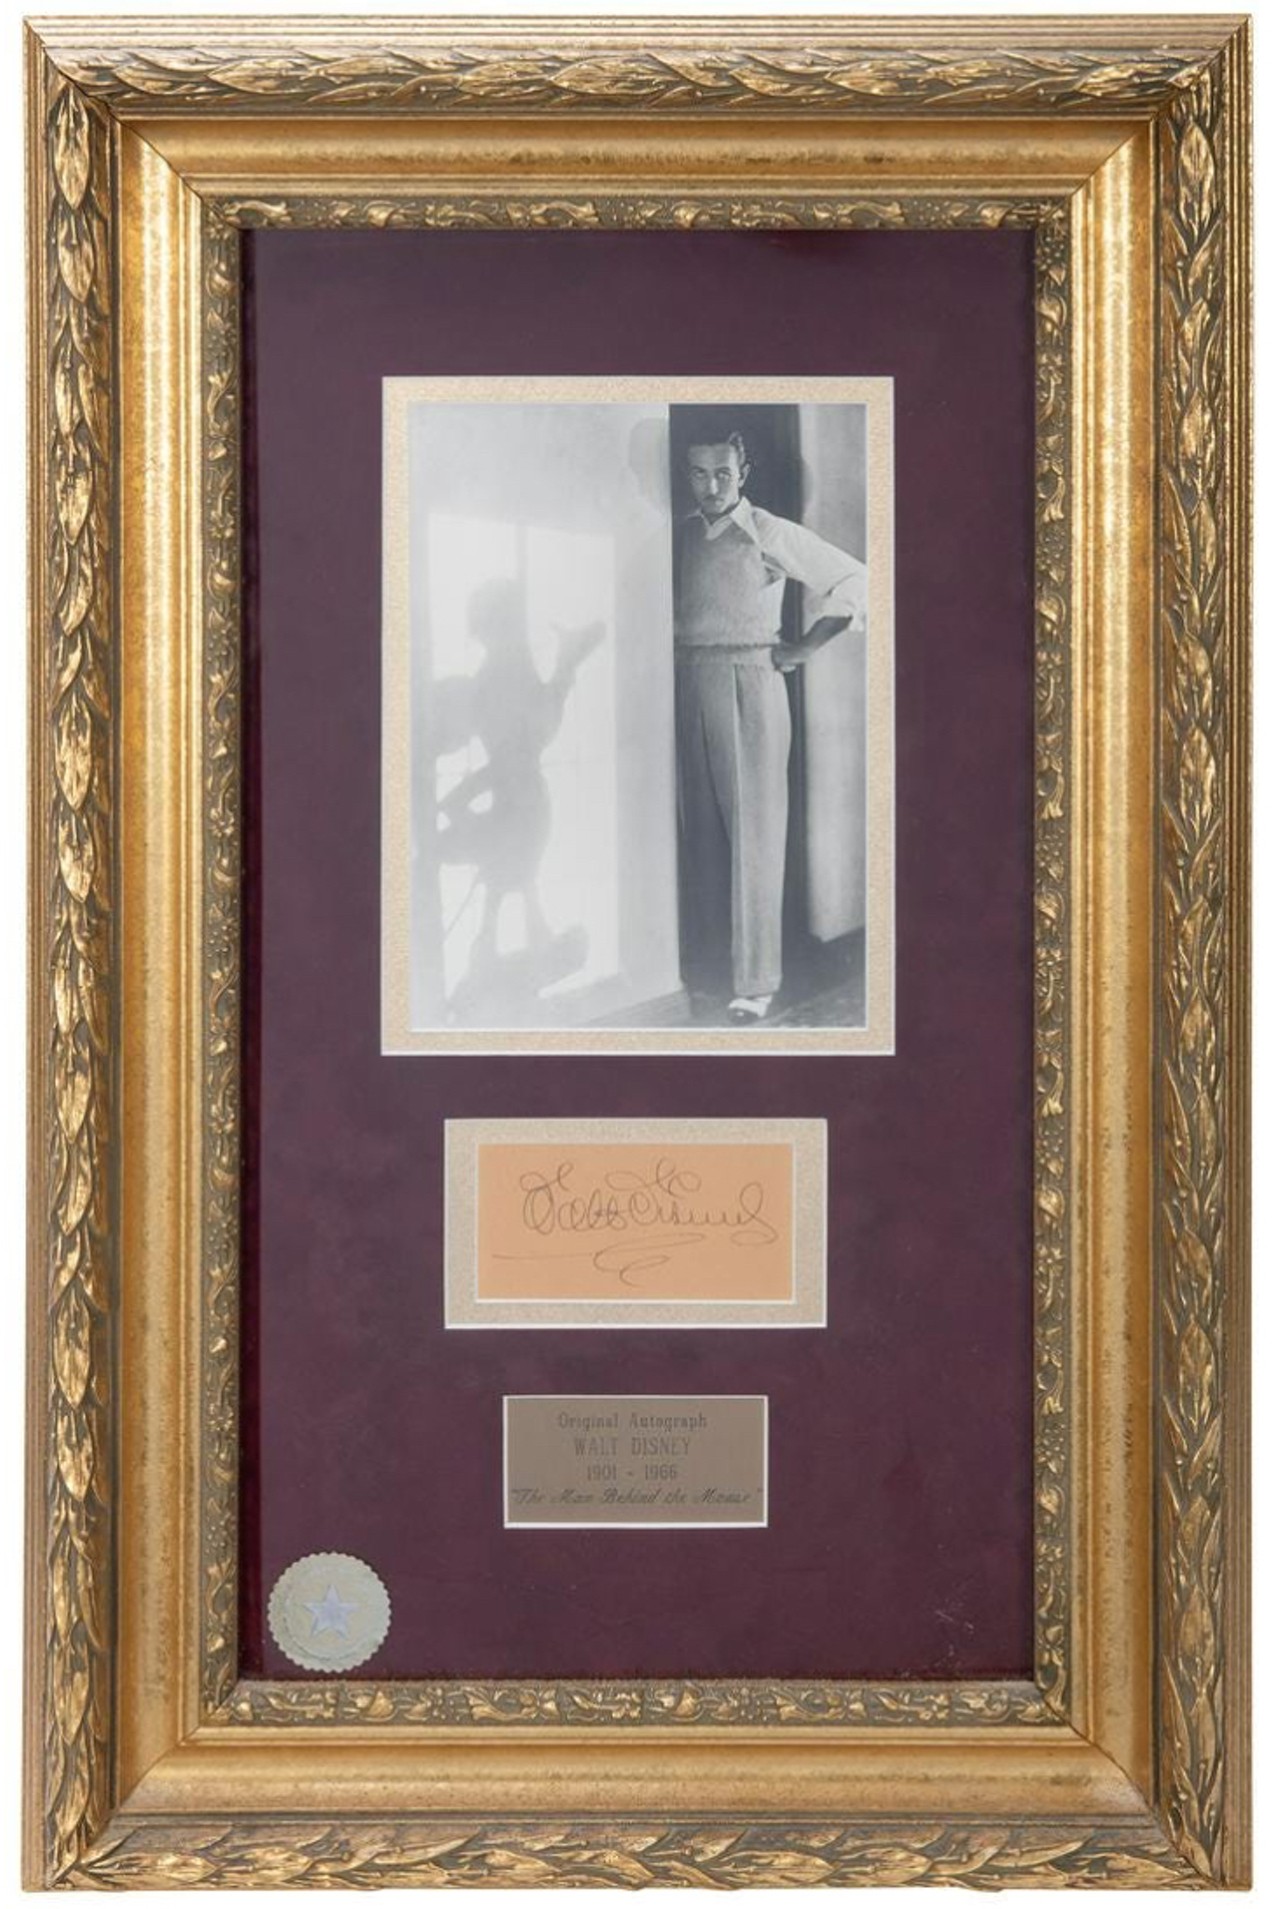 A framed Walt Disney autograph
Estimated sale price: $800-1200
This 27-&frac12; x 18&#148; piece includes a clipped signature, a photo, and a plaque. It has a CoA from Walt Disney World Co. affixed to the back of its frame.